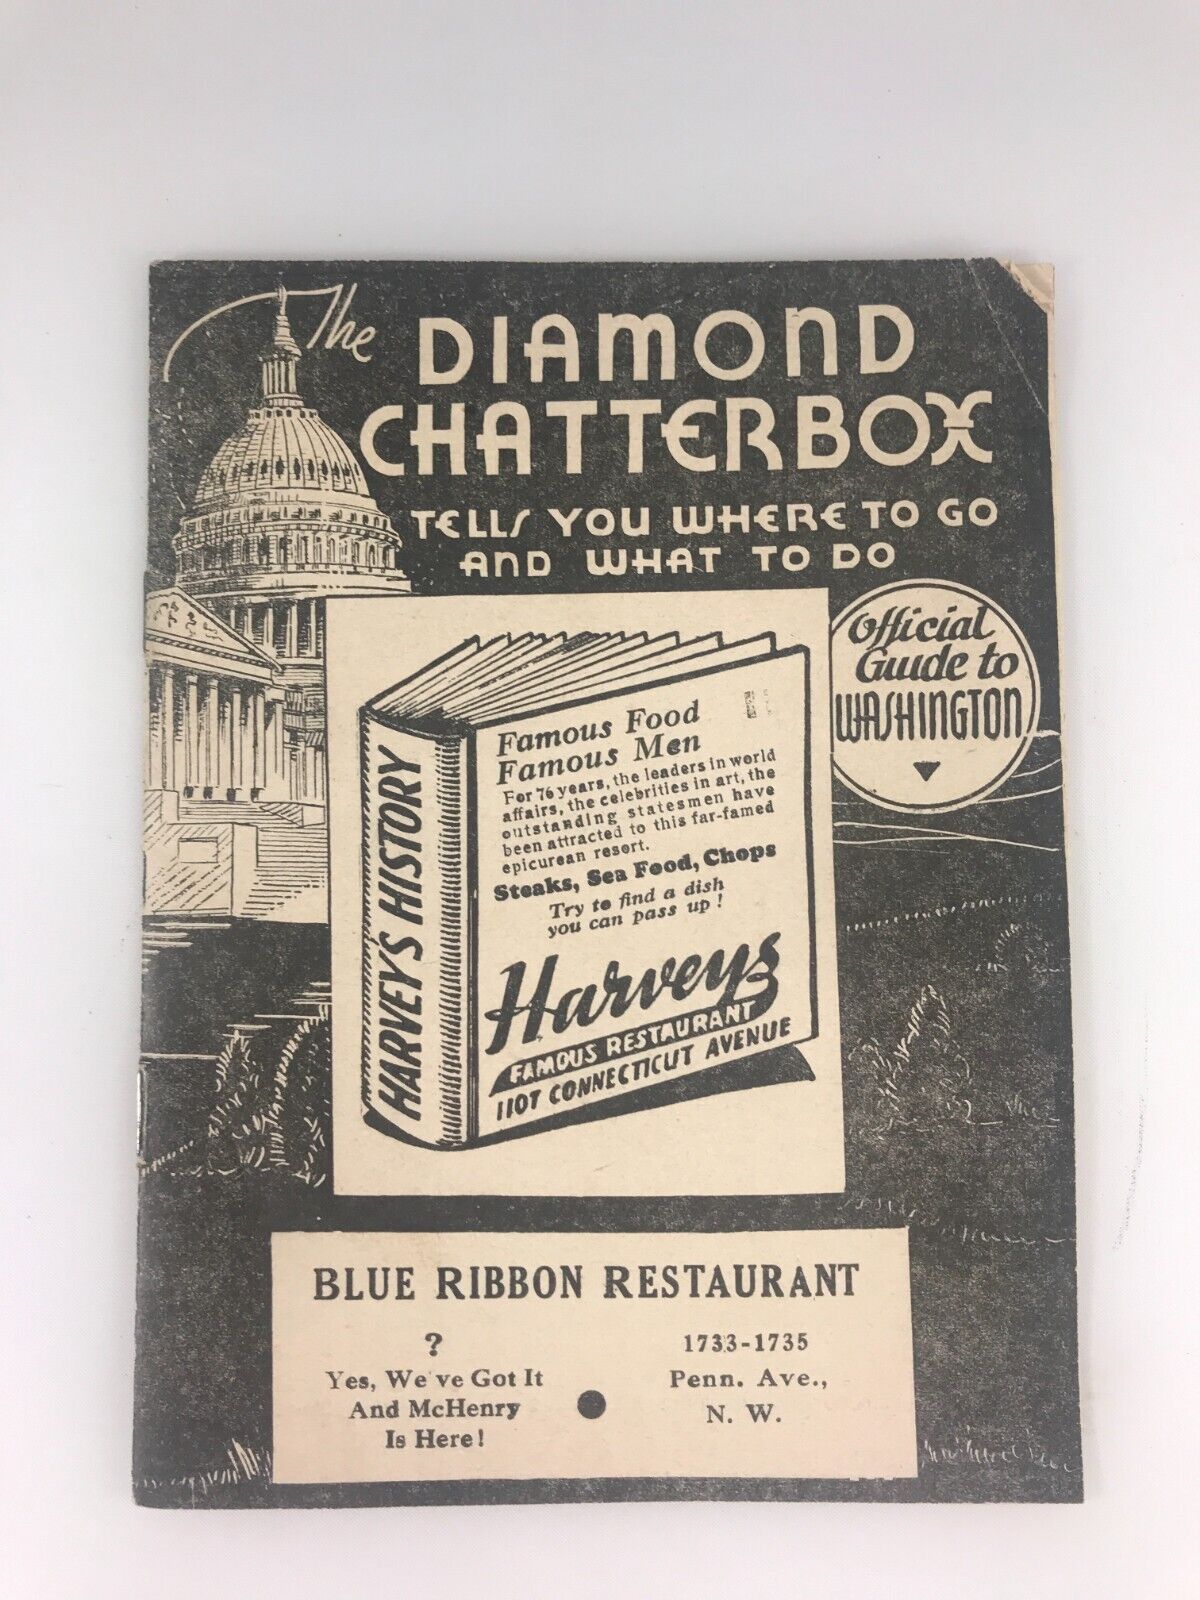 1935 The Diamond Chatterbox Official Guide to Washington w/ Bonus Paper Clipping